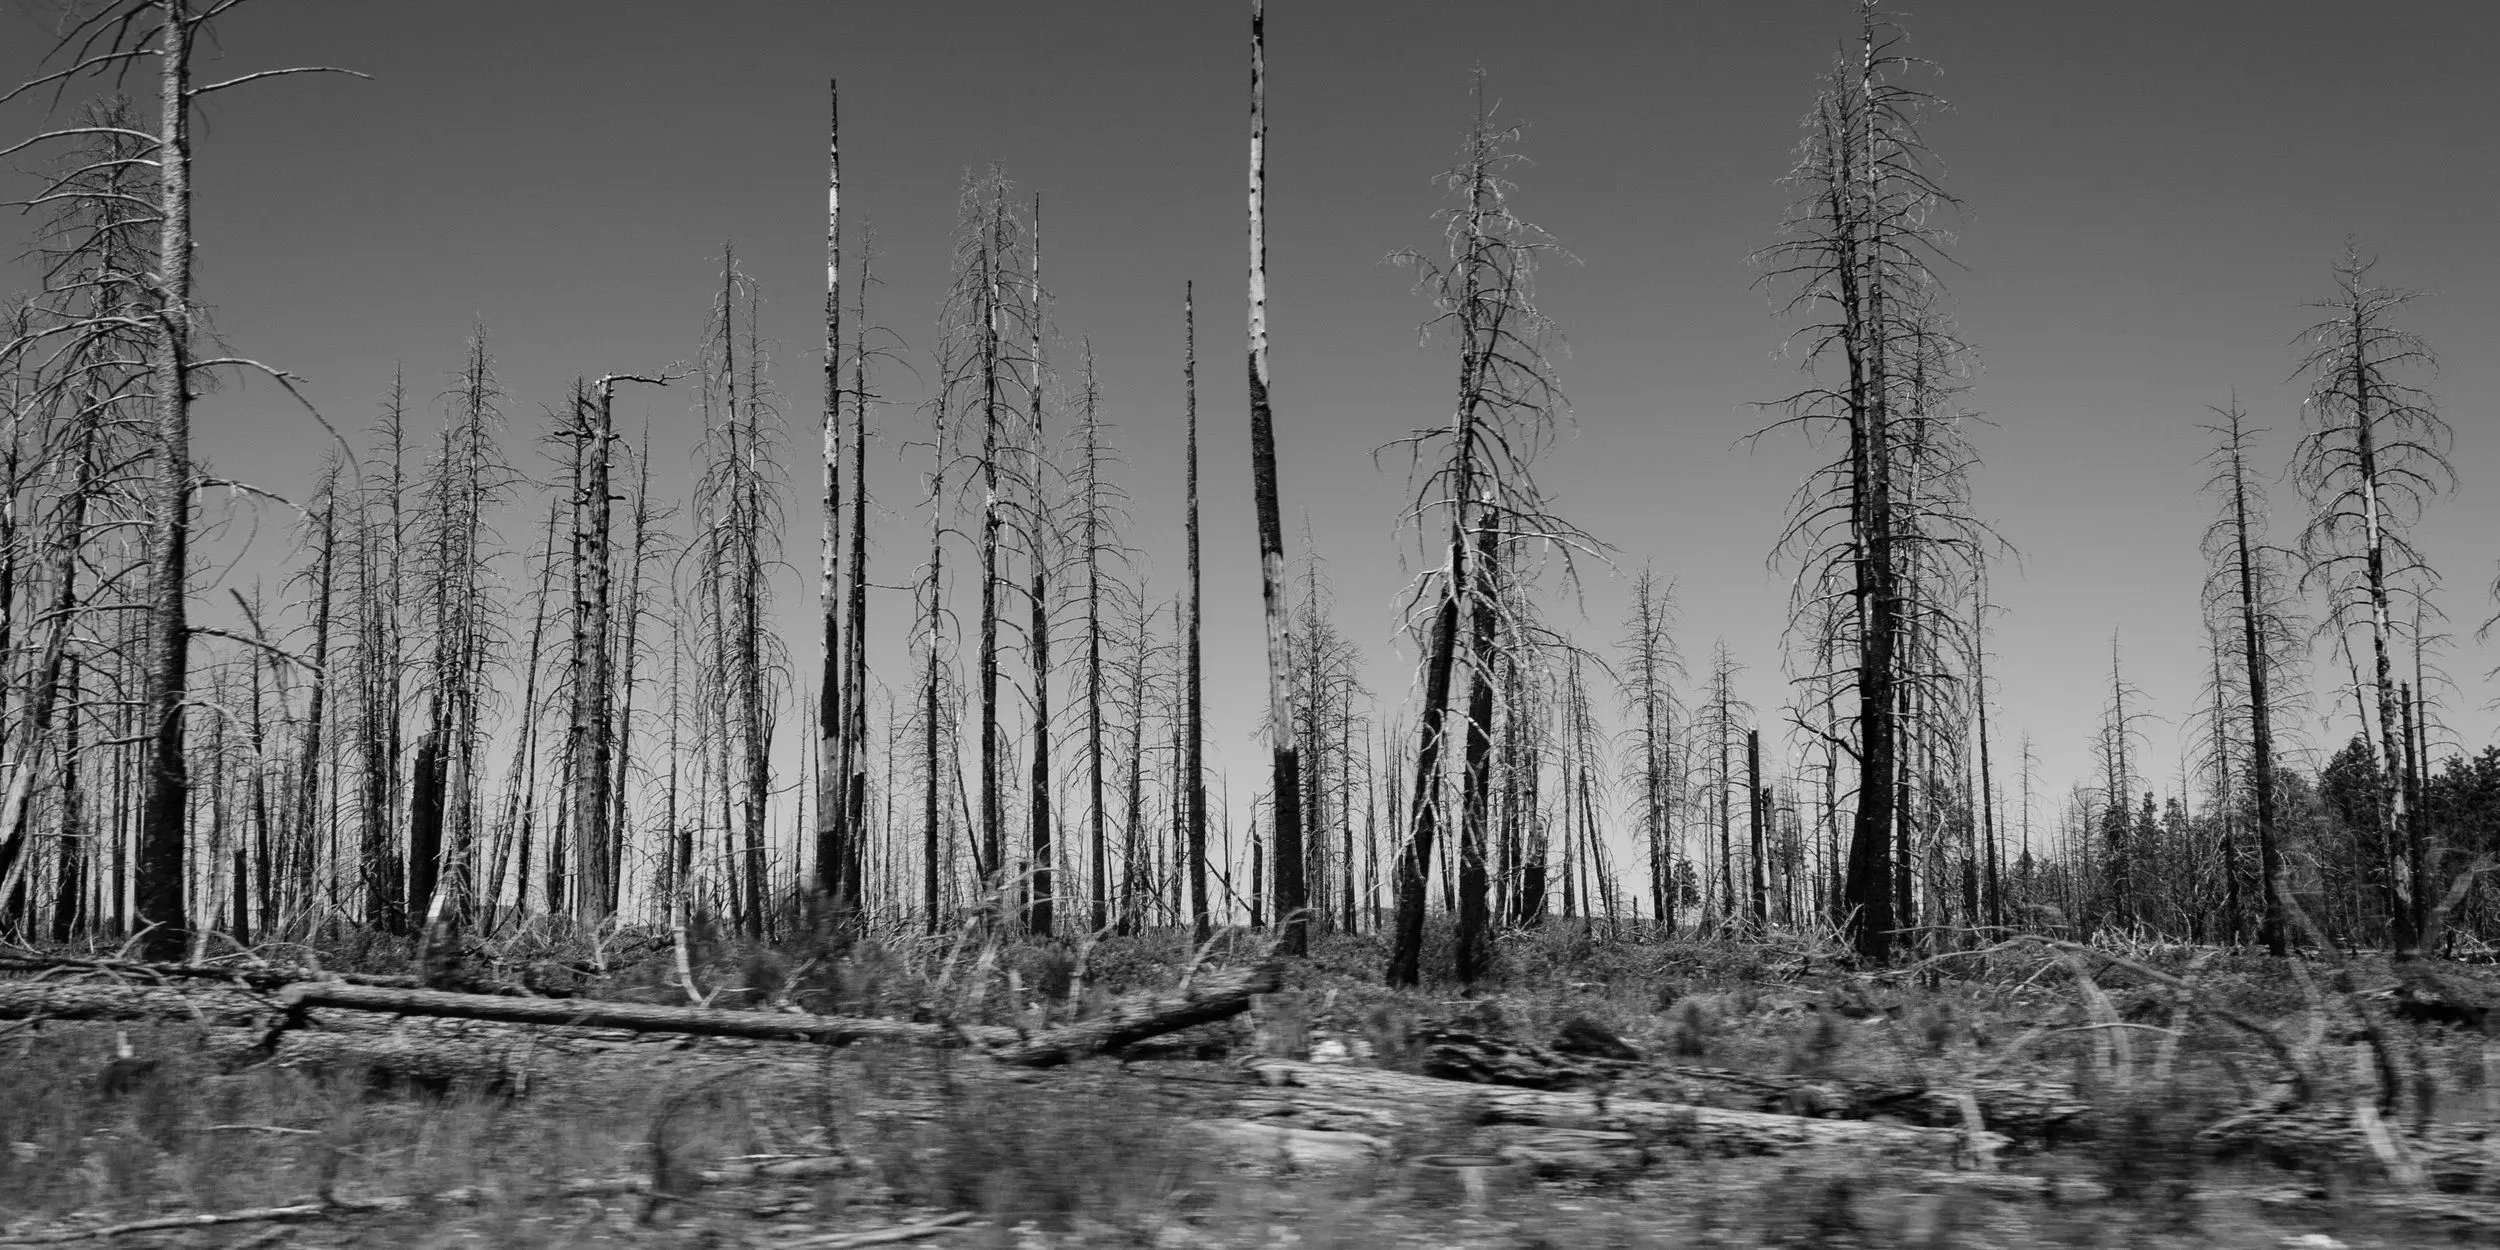 Black and white charred remains of Bryce Canyon's burned trees.